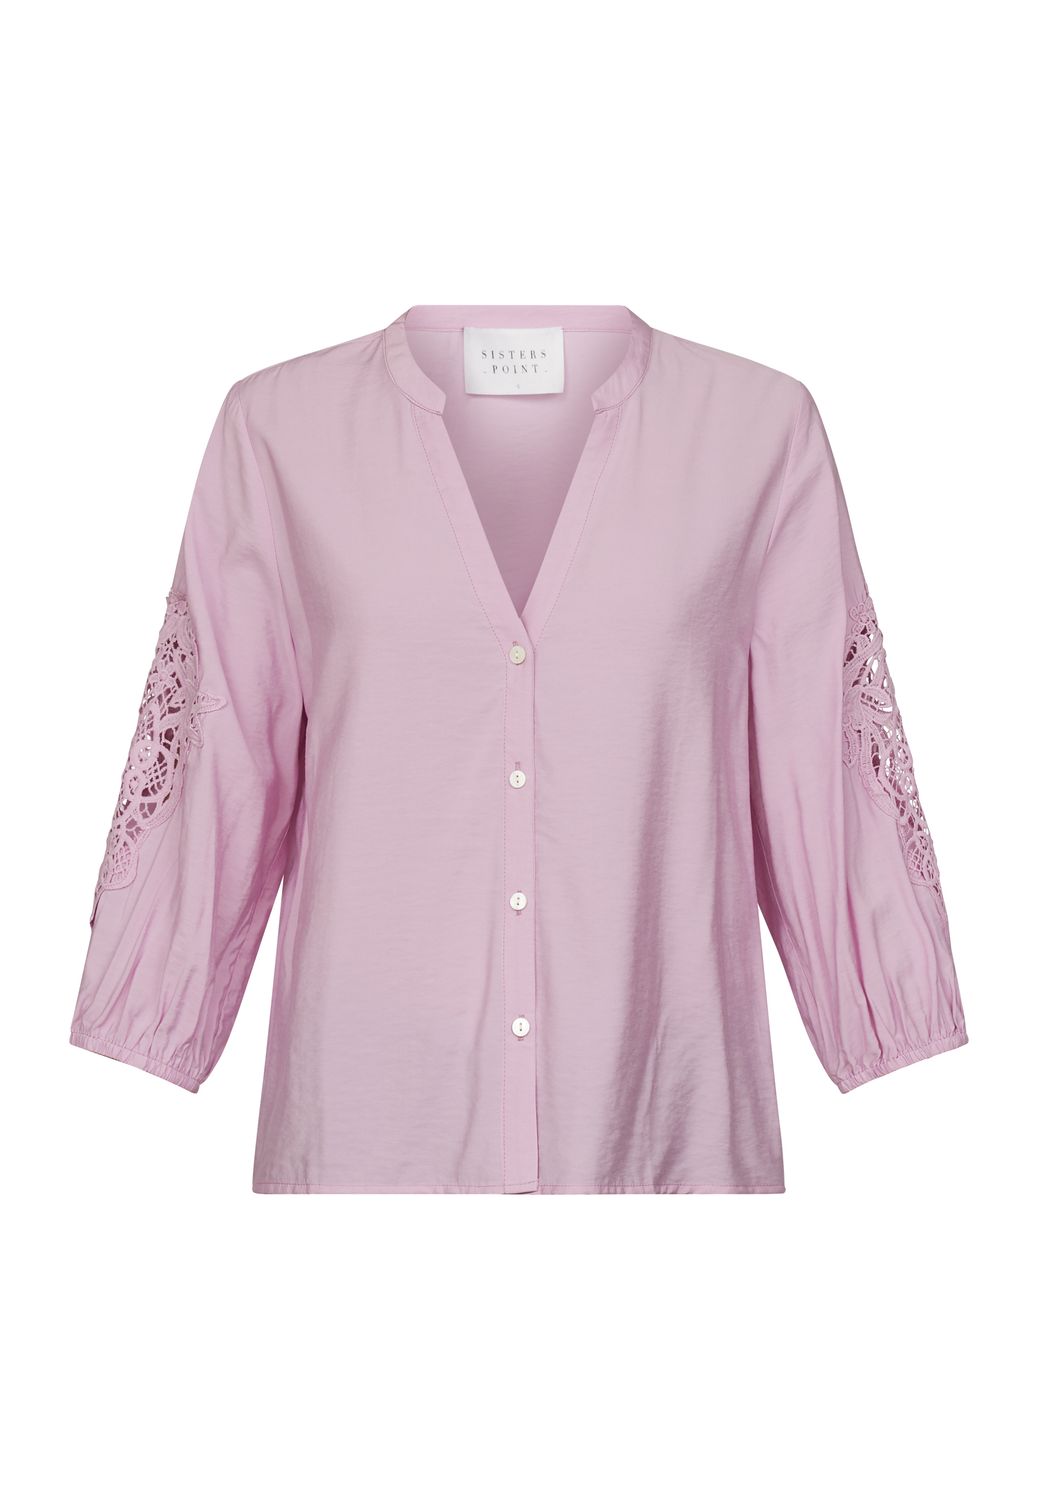 Sisters Point VIABA-SH Soft Pink 17342